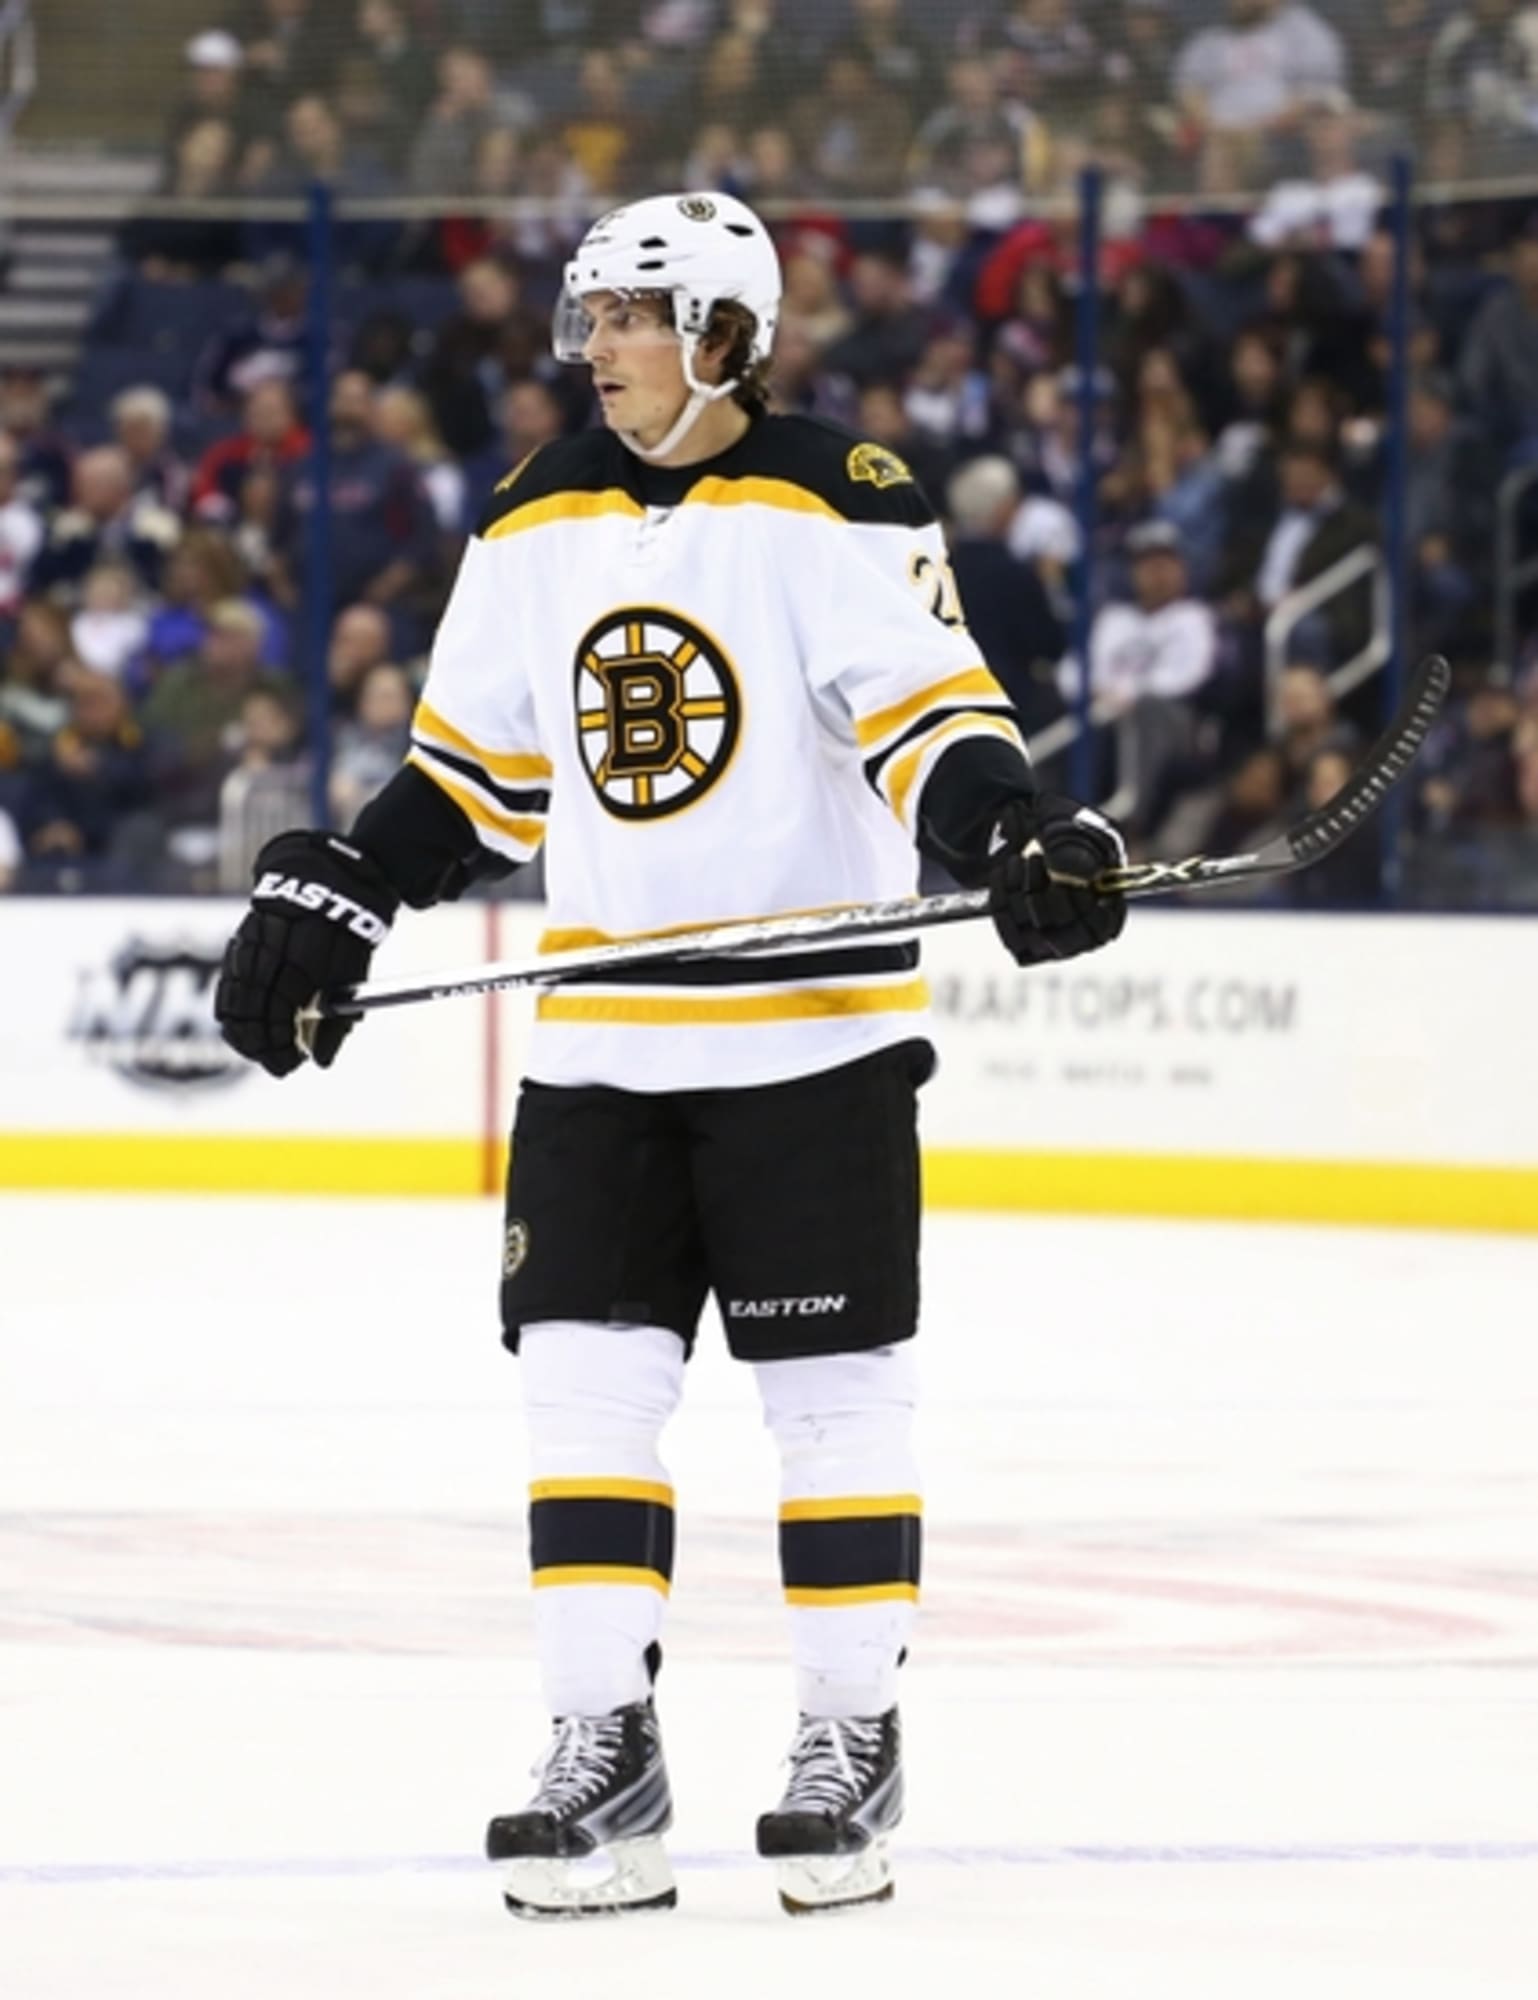 Short shifts: Loui Eriksson's long-term status with the Boston